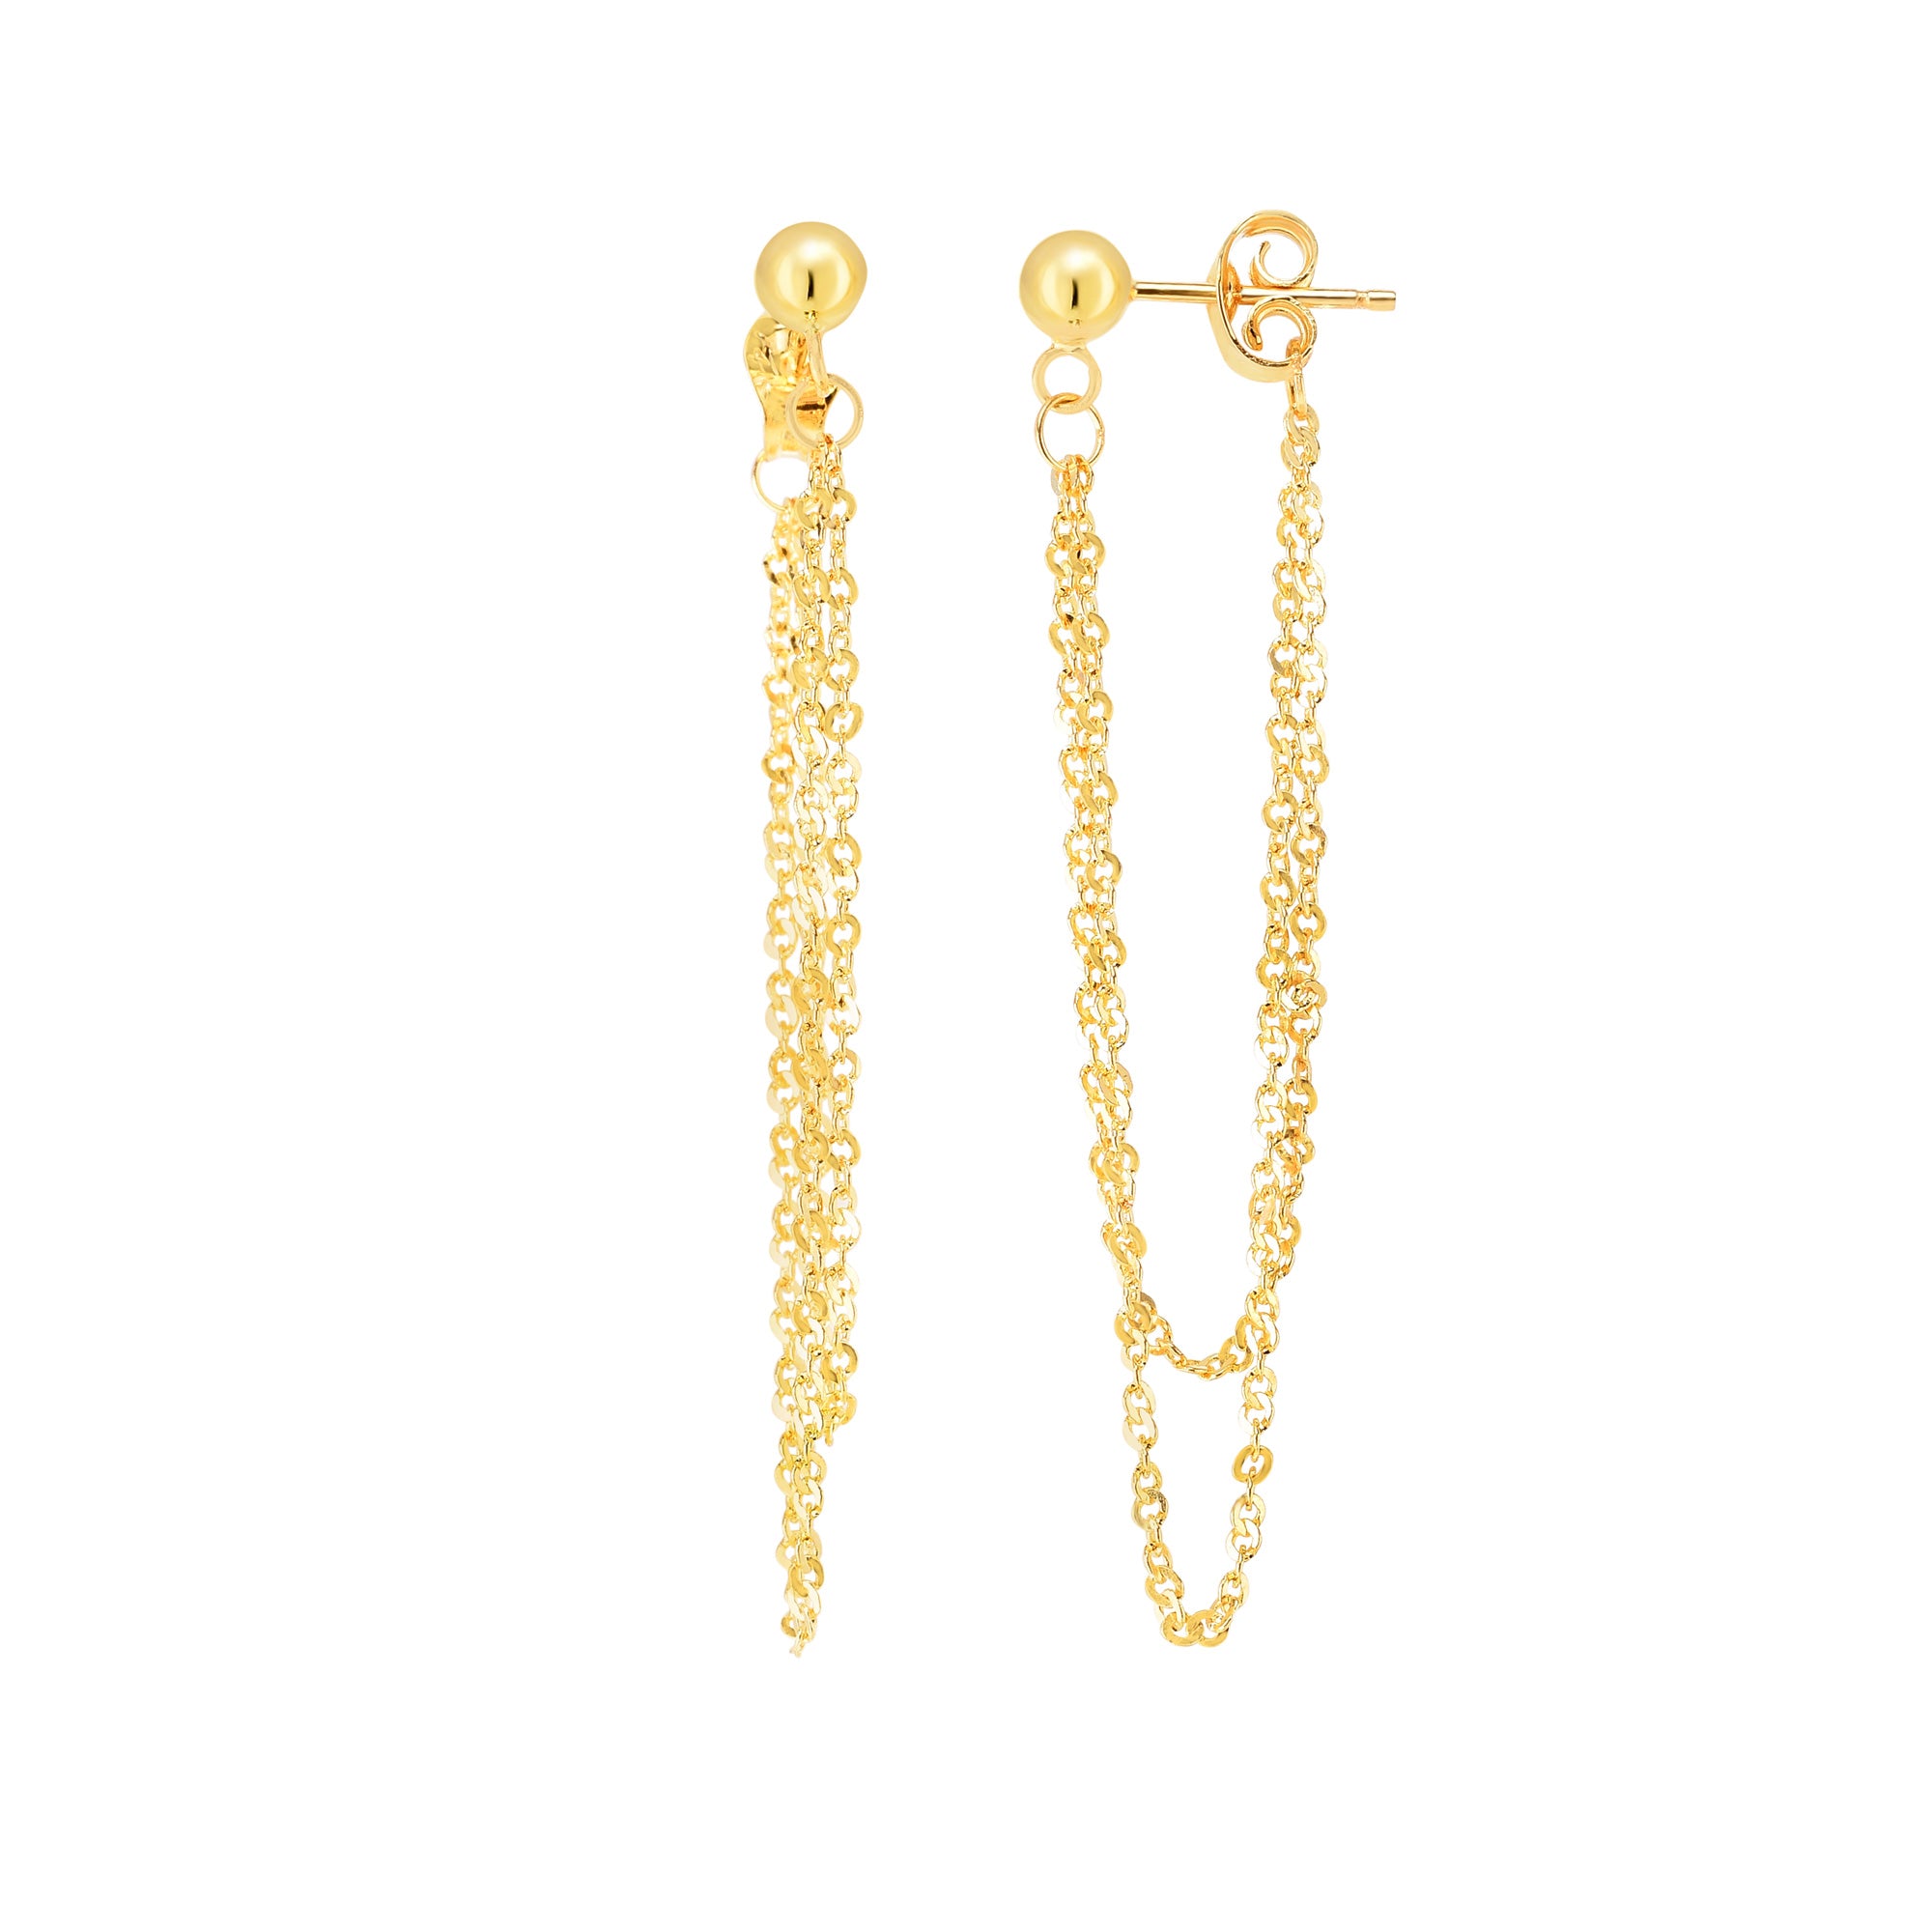 14K Yellow Gold Multi Stranded Cable Chain Front And Back Style Drop Earrings fine designer jewelry for men and women